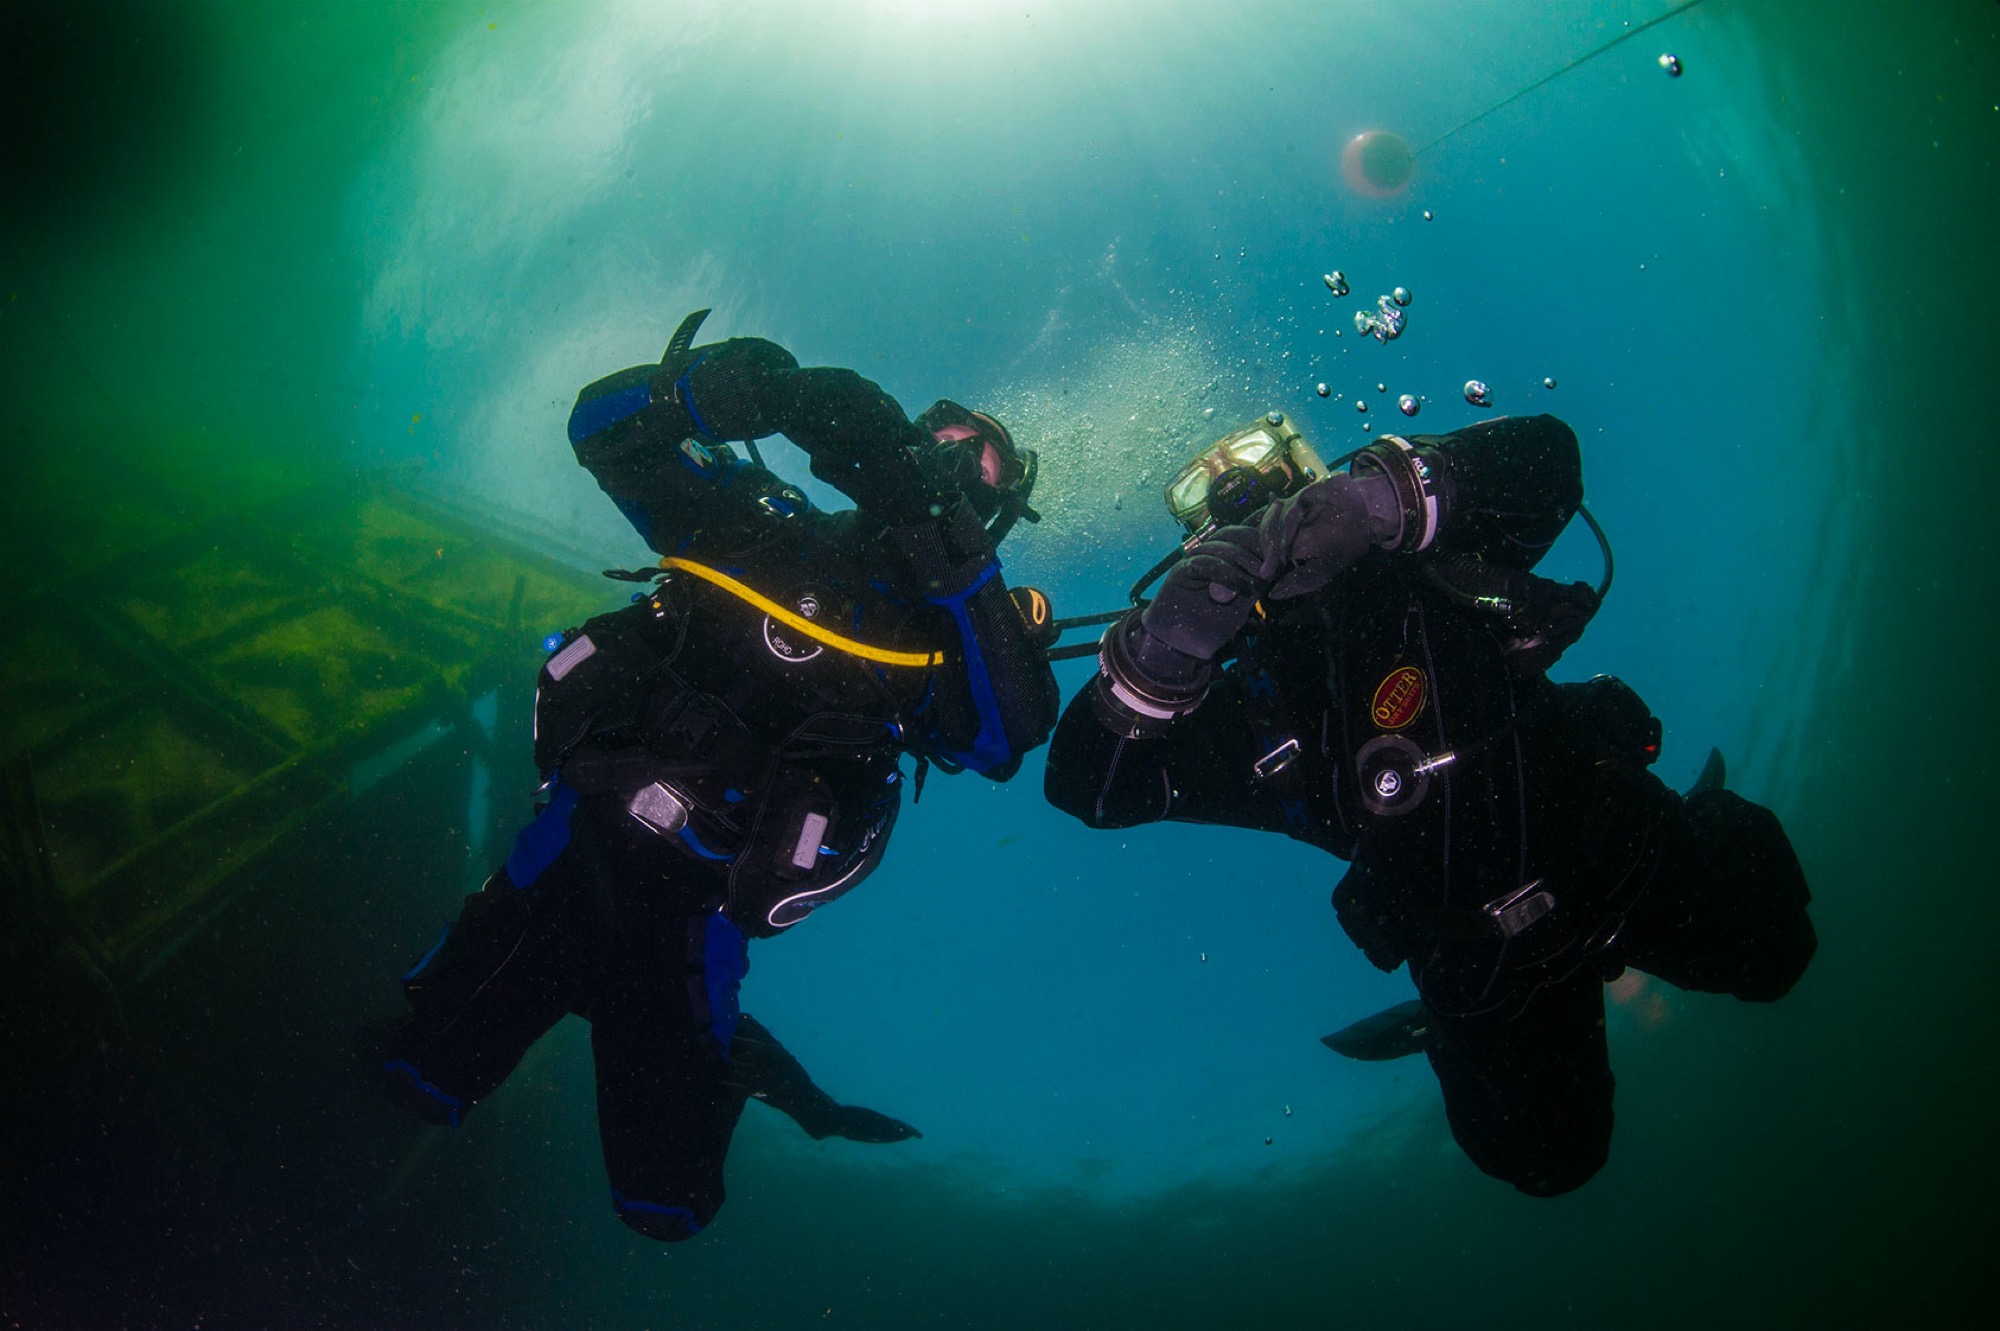 Two scuba divers in drysuits are ascending safely and slowly to the surface as they know rapid ascents can cause diving bends